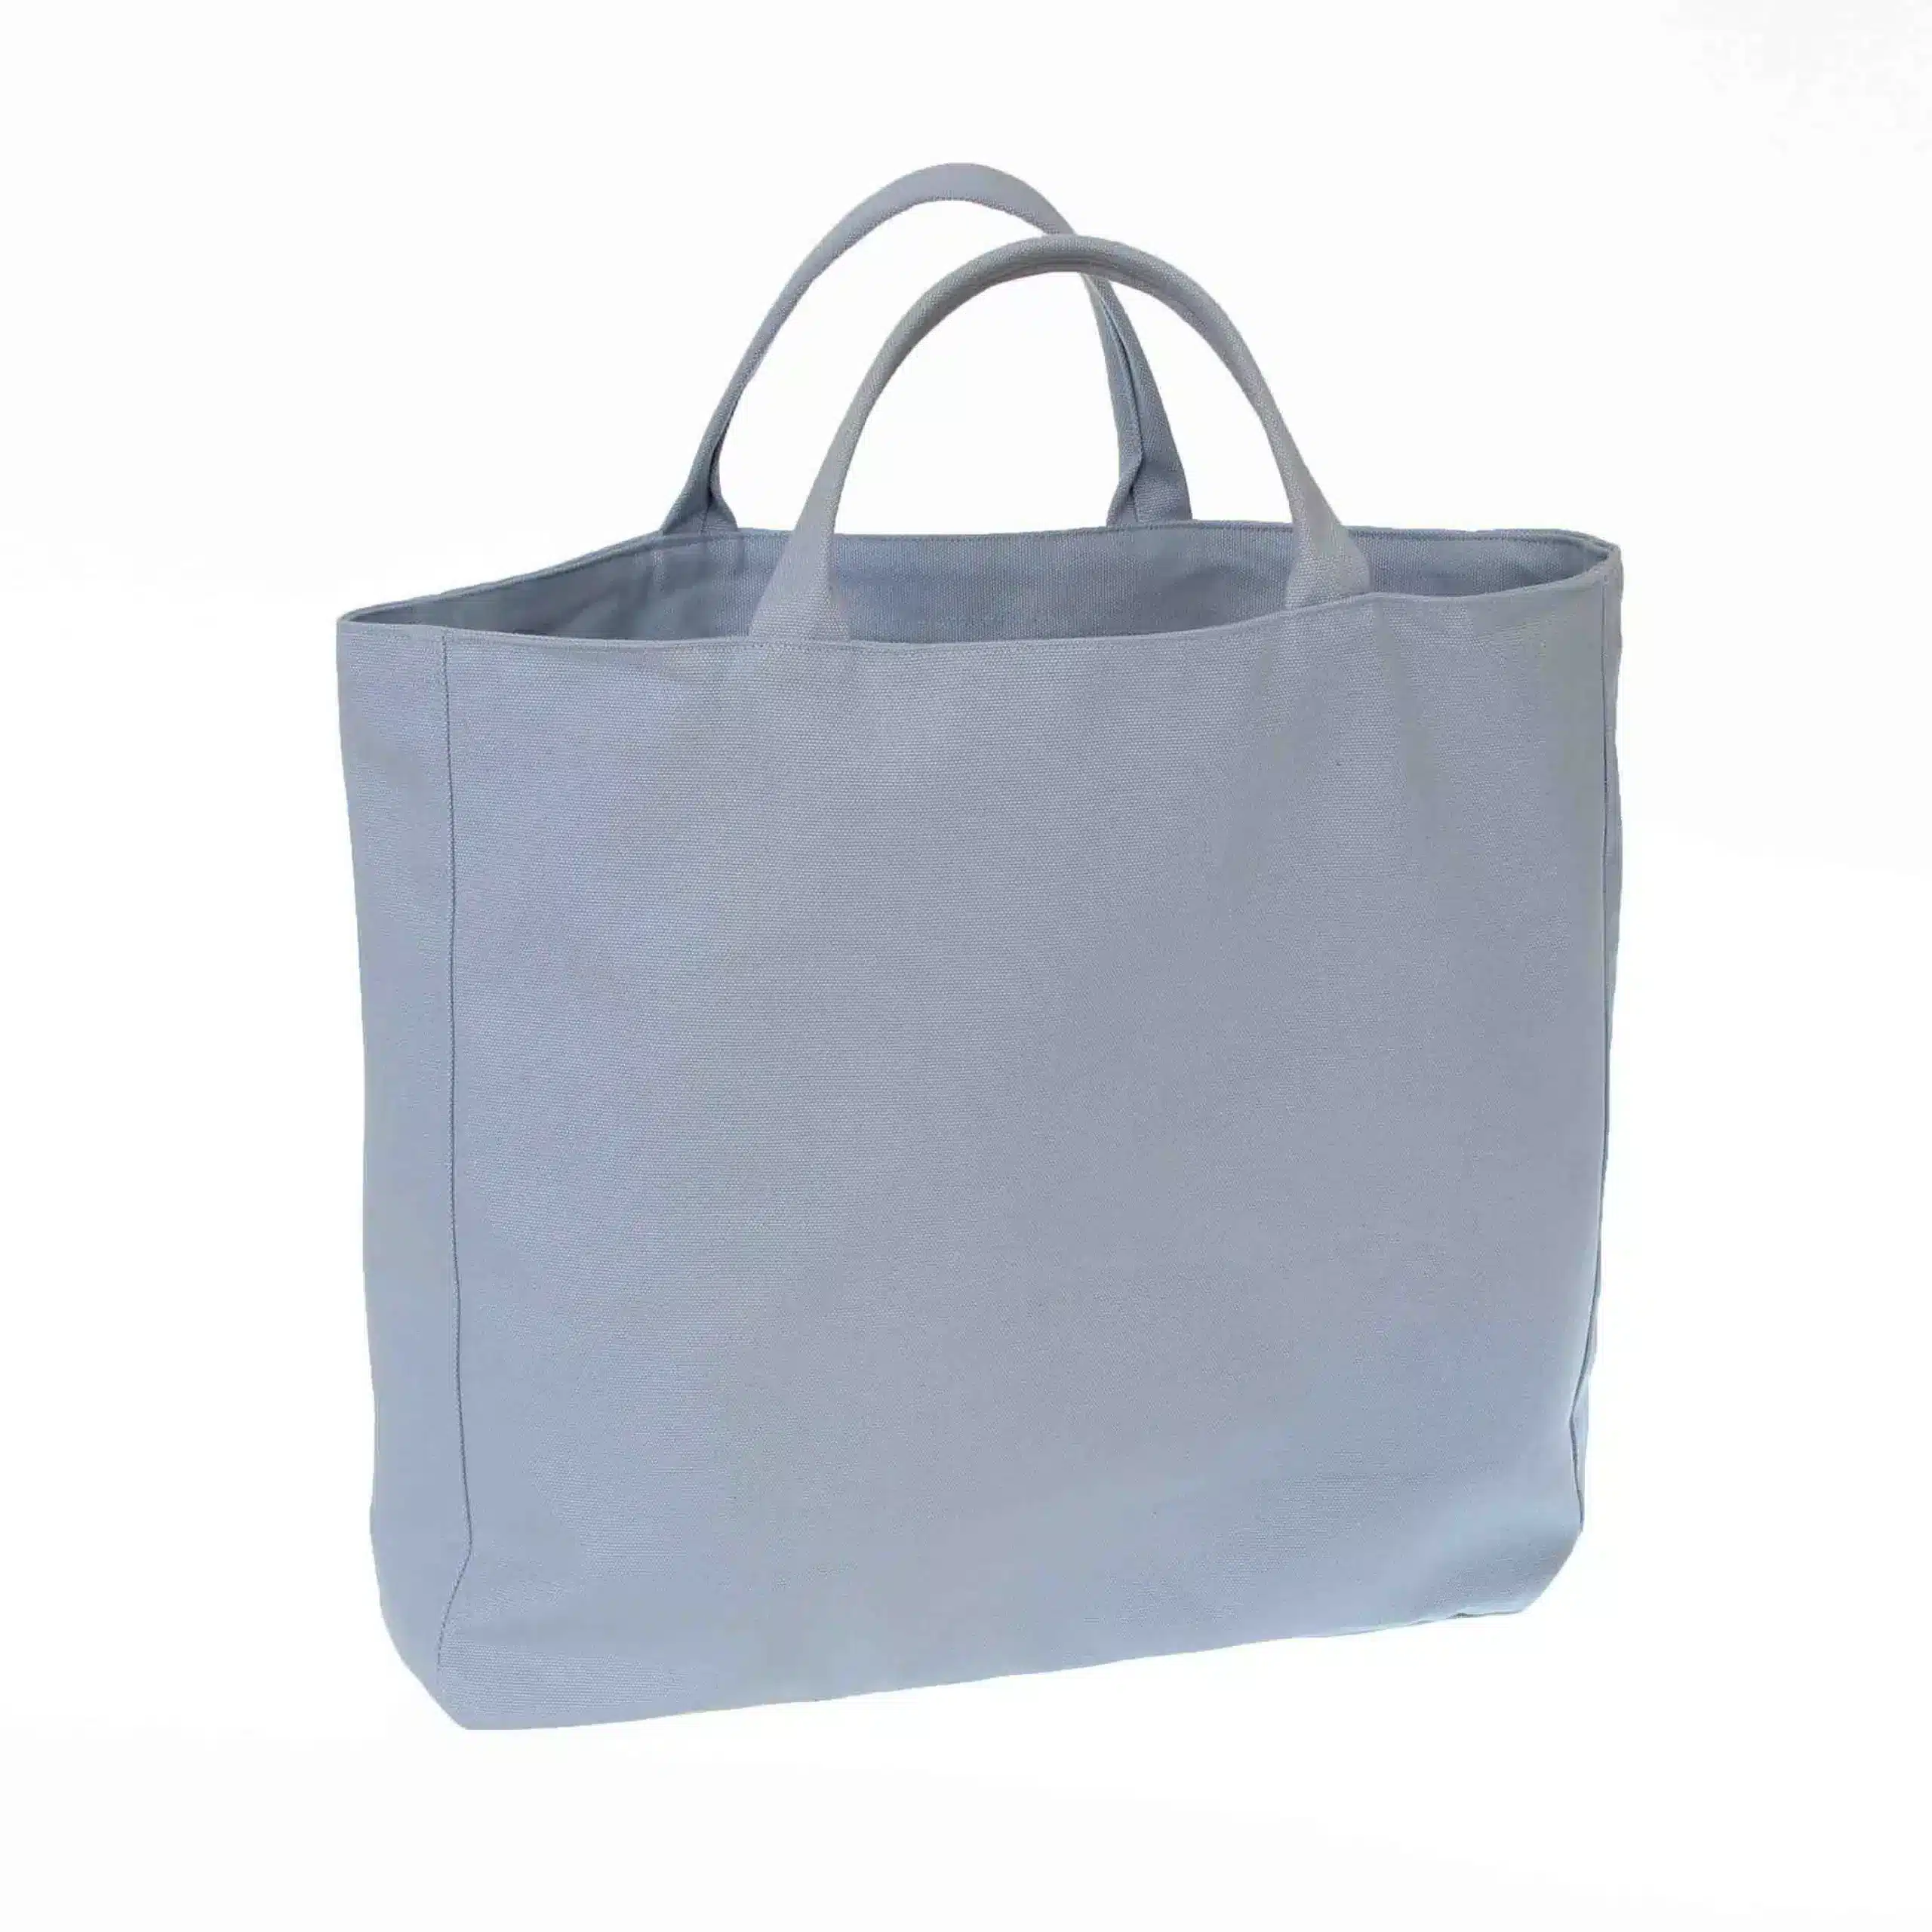 Cotton Canvas Totes - Made to Order